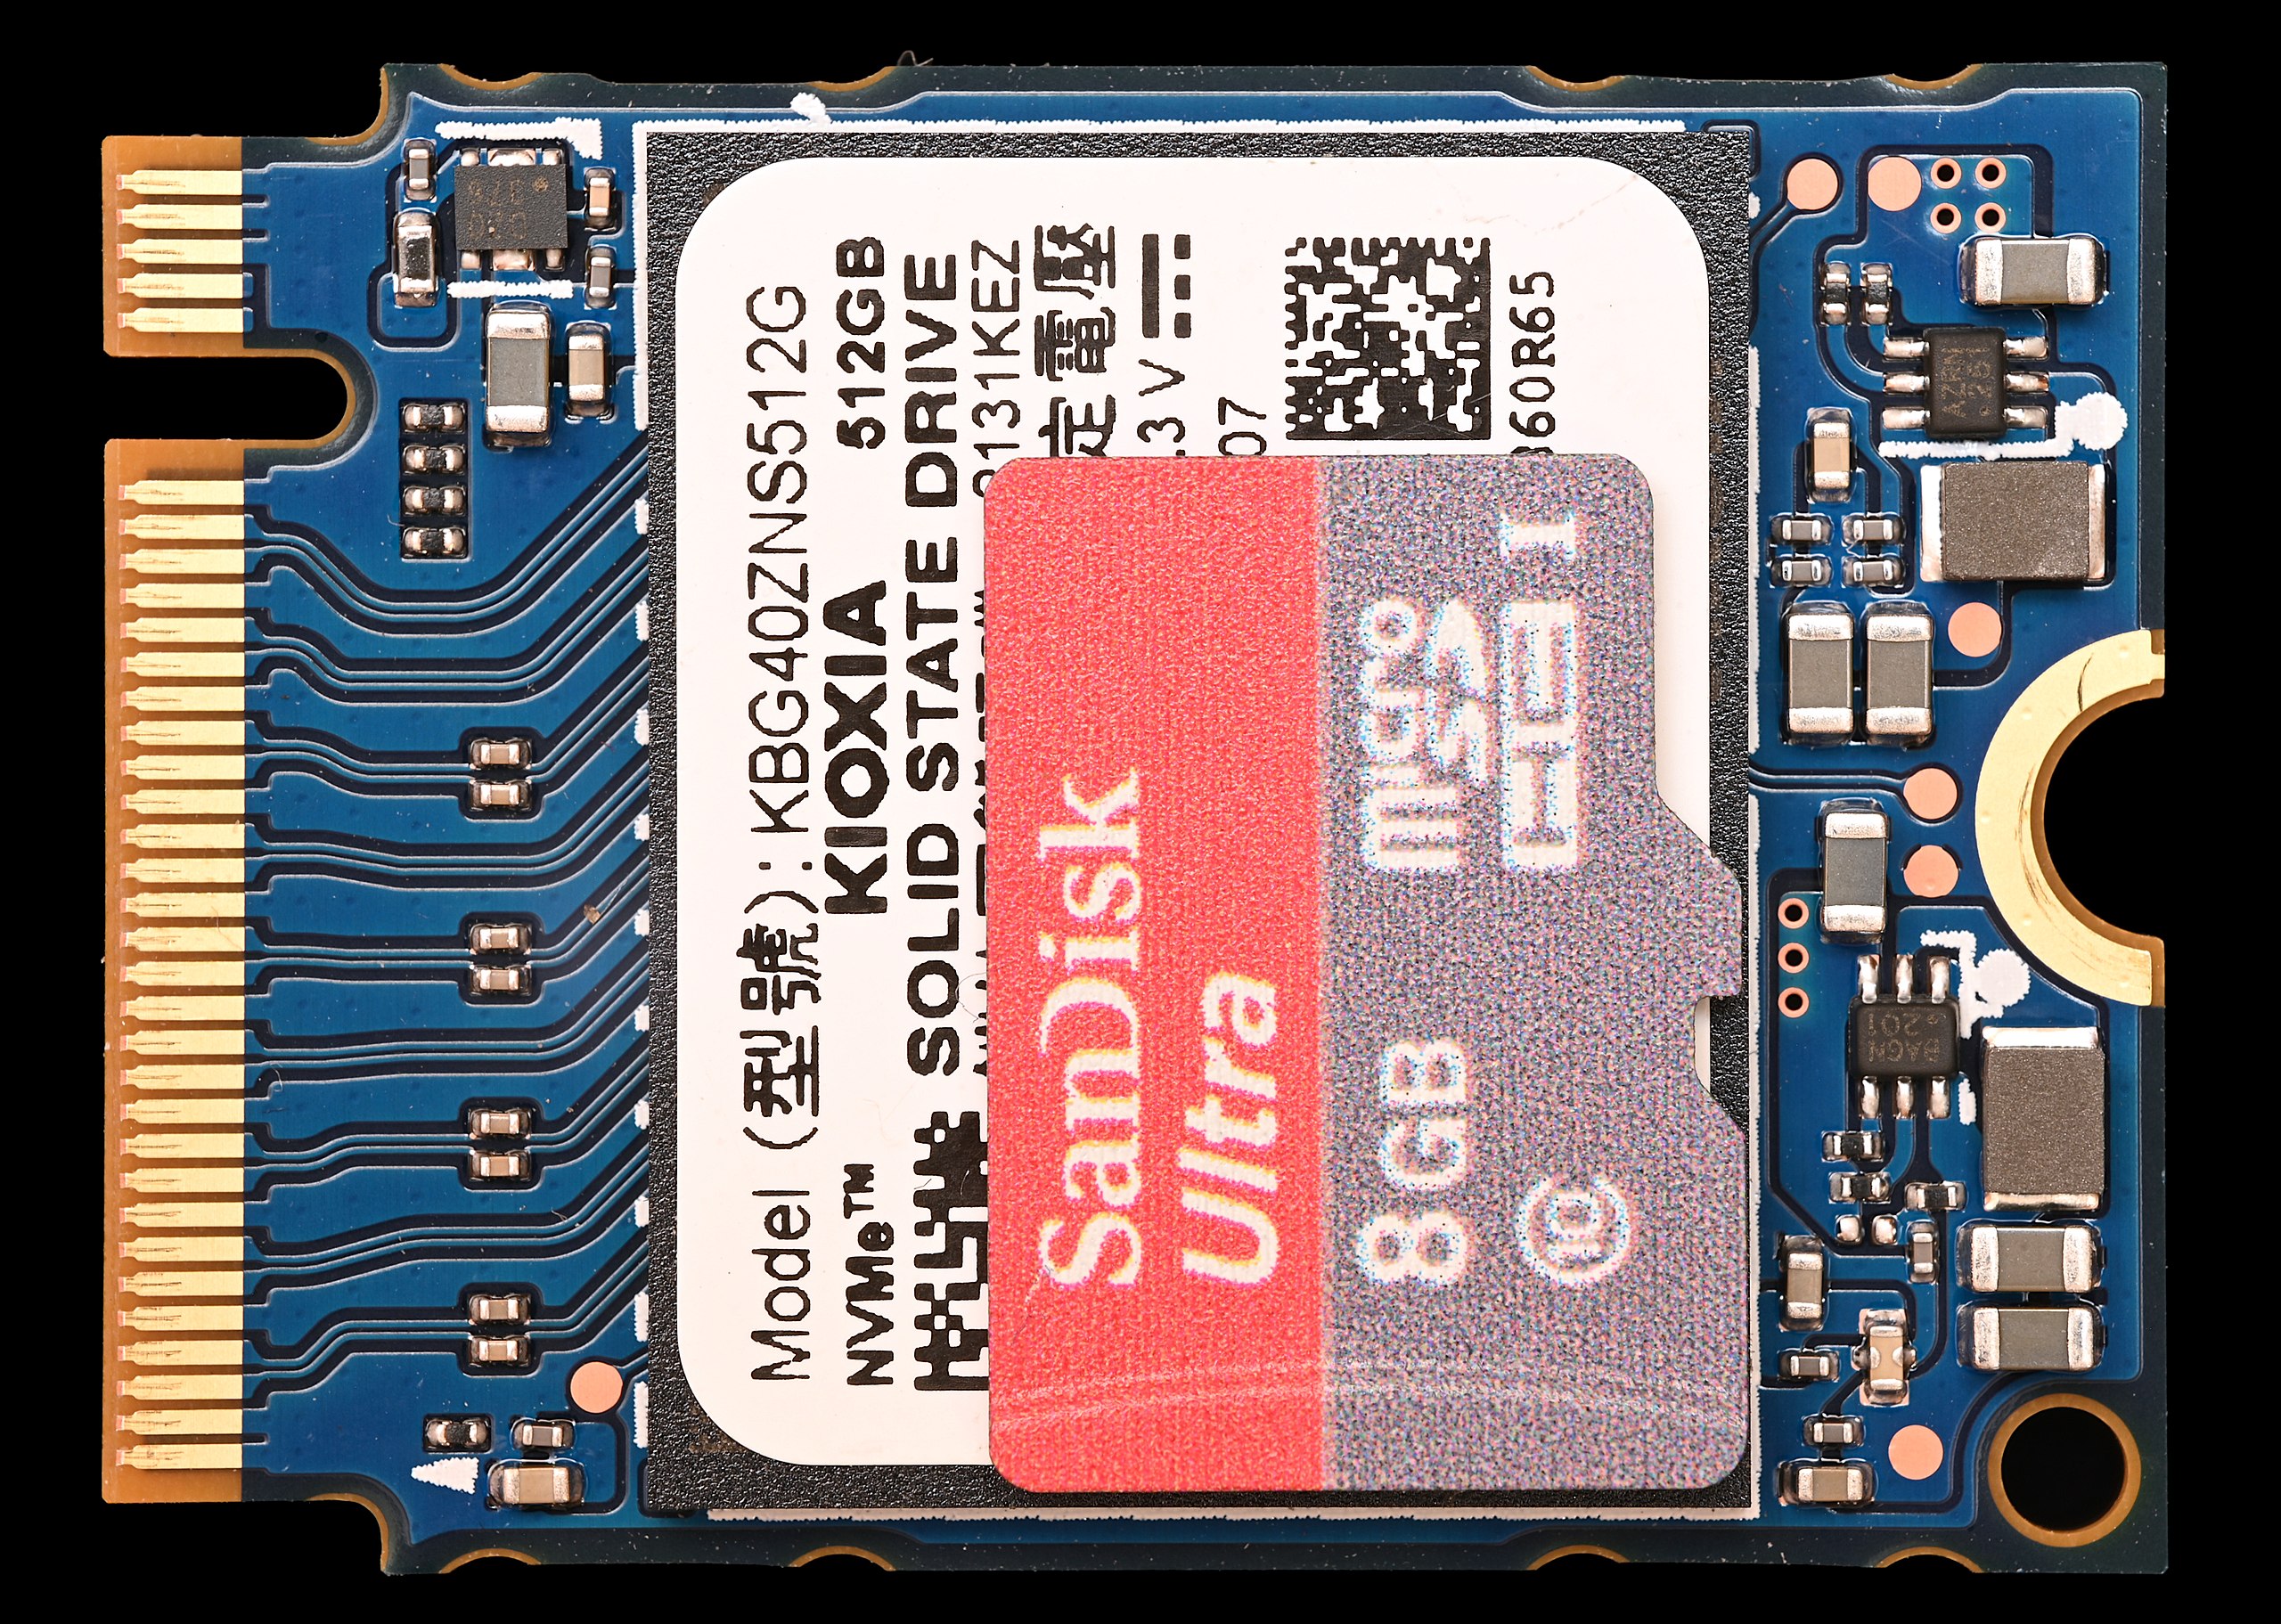 https://upload.wikimedia.org/wikipedia/commons/thumb/1/15/M.2_2230_M-key_SSD_in_comparison_with_Micro-SD_card.jpg/2560px-M.2_2230_M-key_SSD_in_comparison_with_Micro-SD_card.jpg